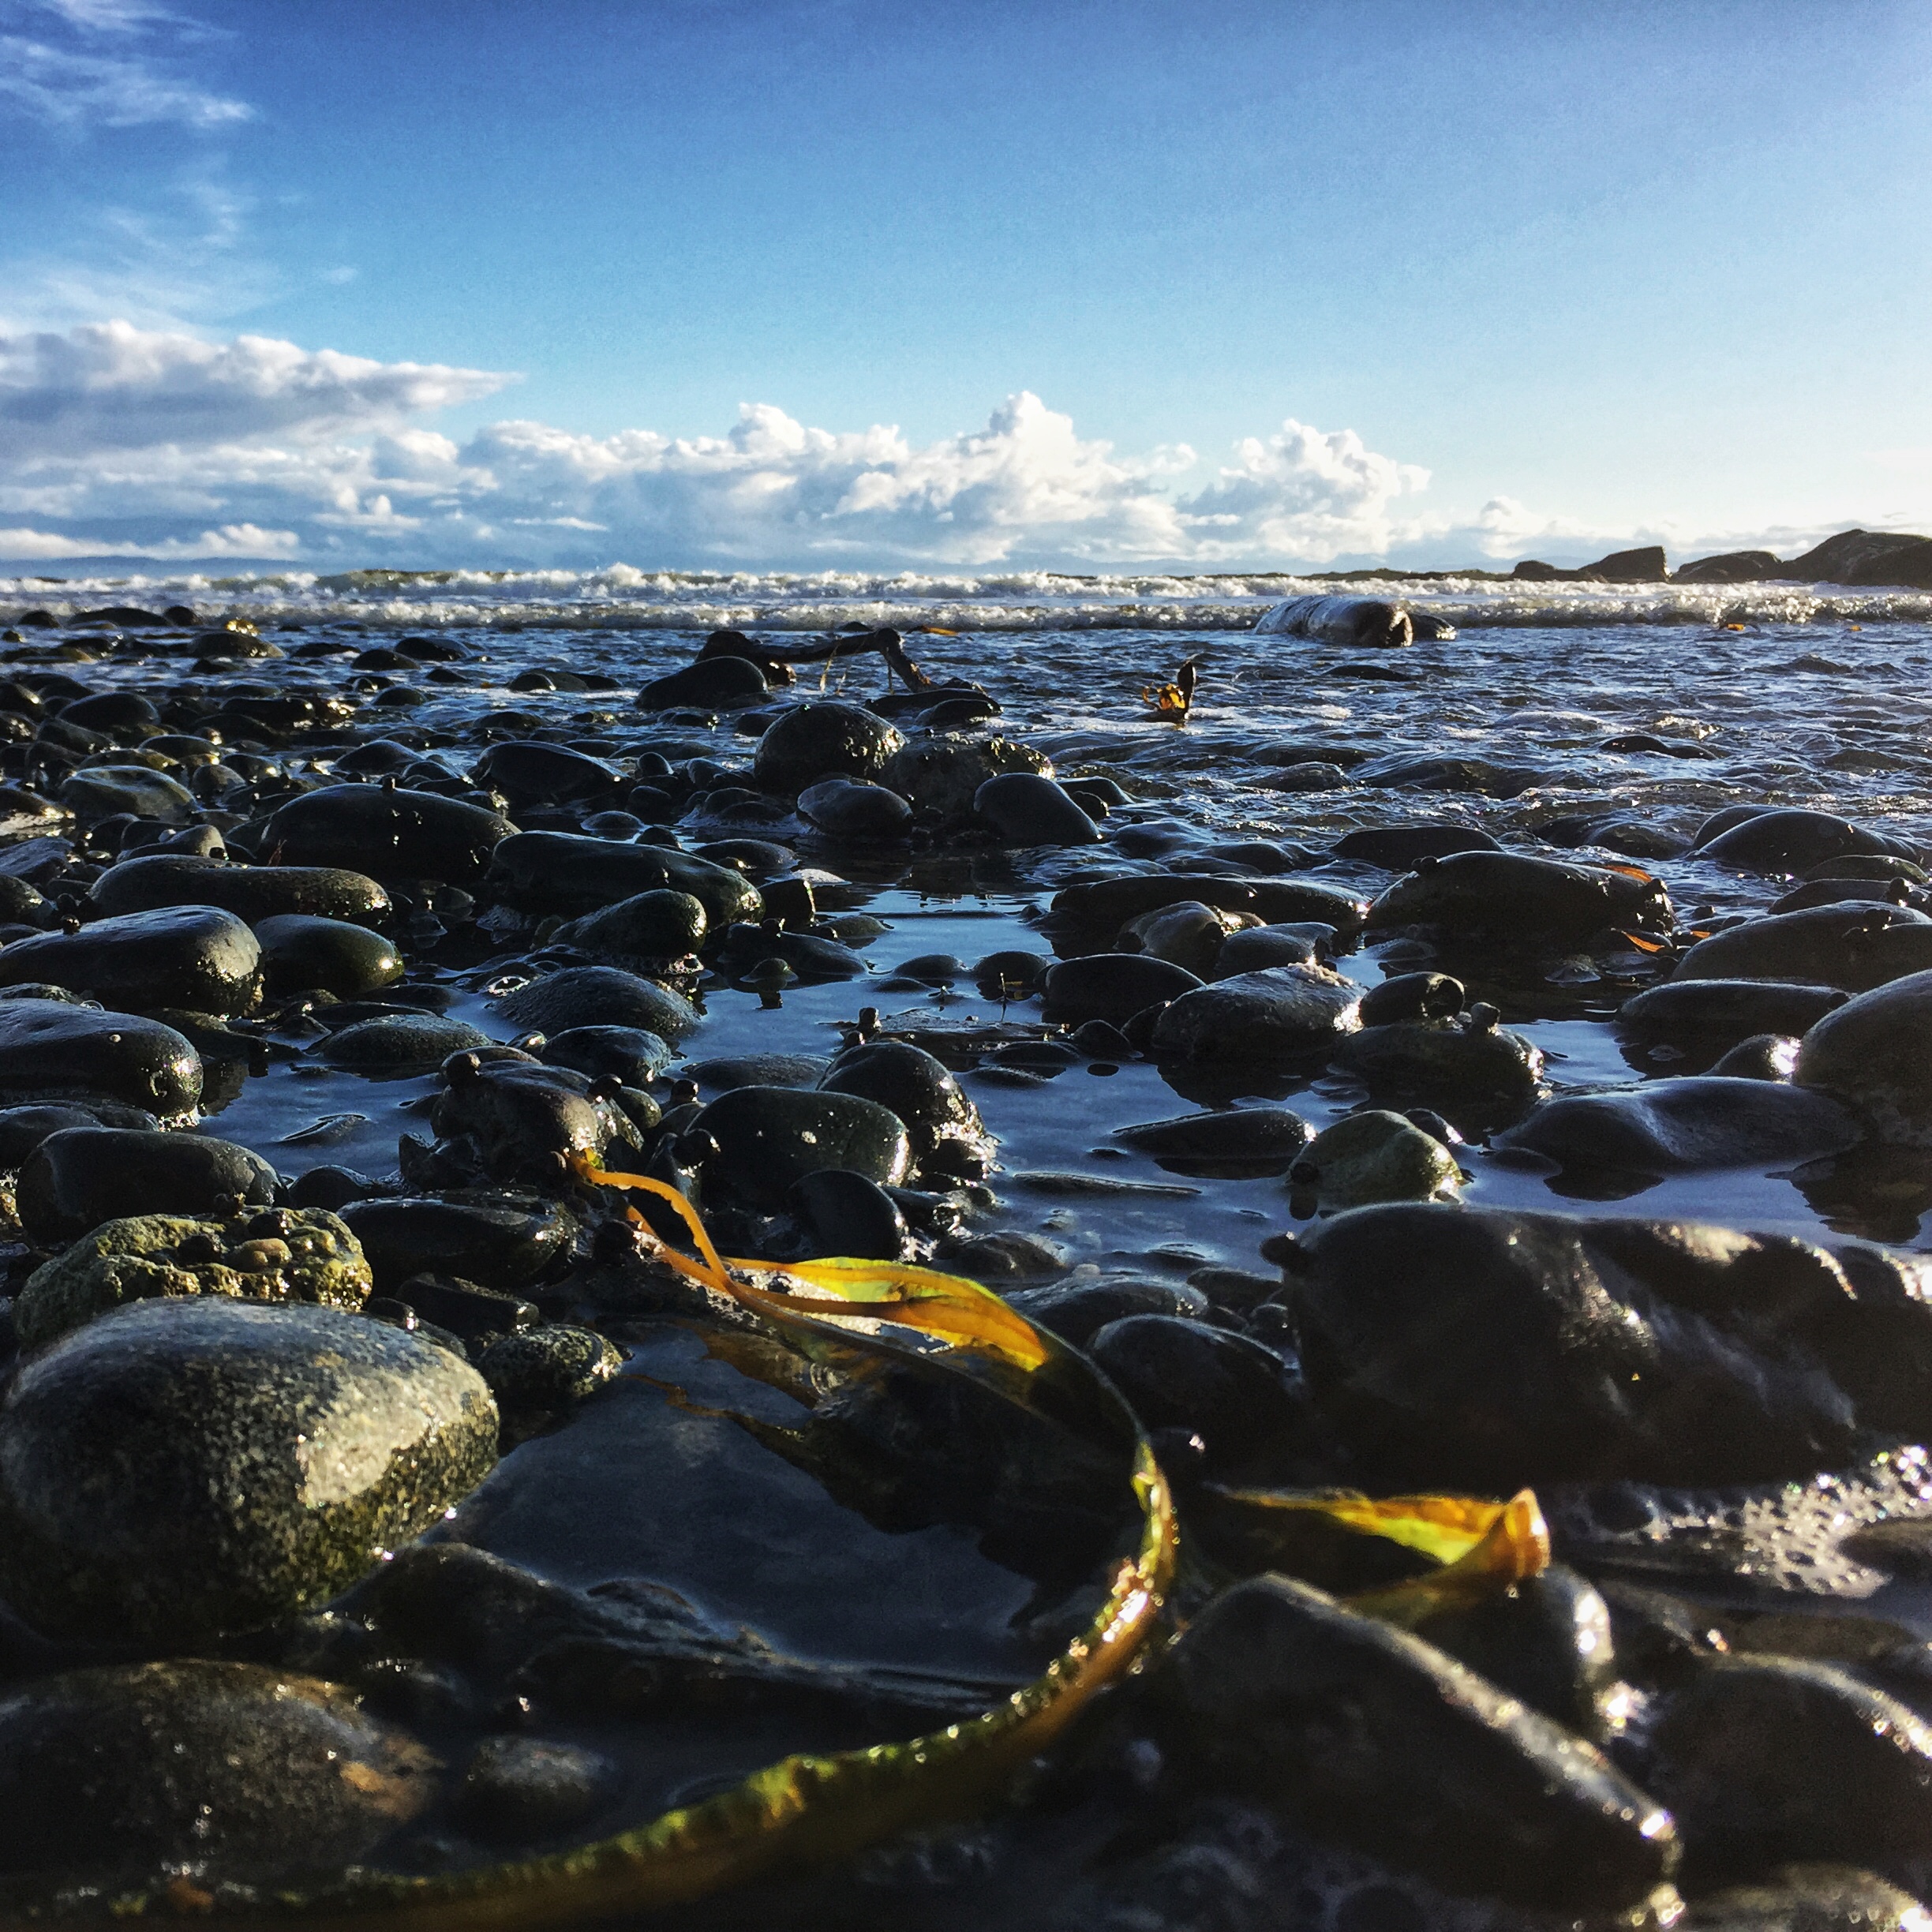 photo taken on the west coast of vancouver island, looking towards the pacific ocean with rocky beach and seaweed in the foreground and waves and clouds in the background